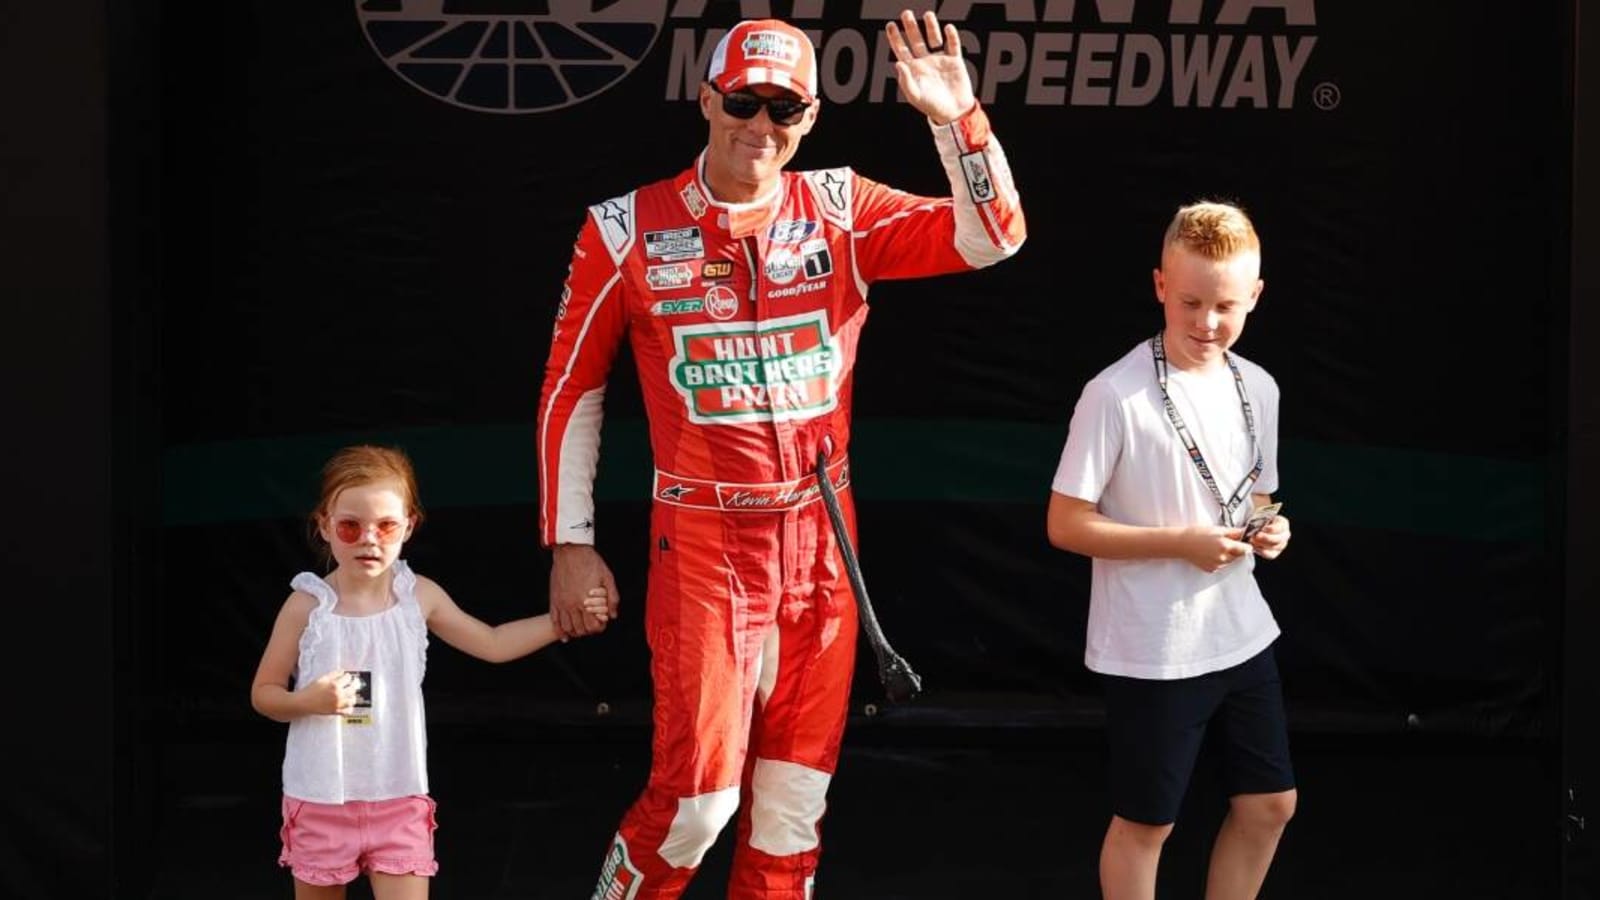 Kevin Harvick’s son hopes to pursue career in F1